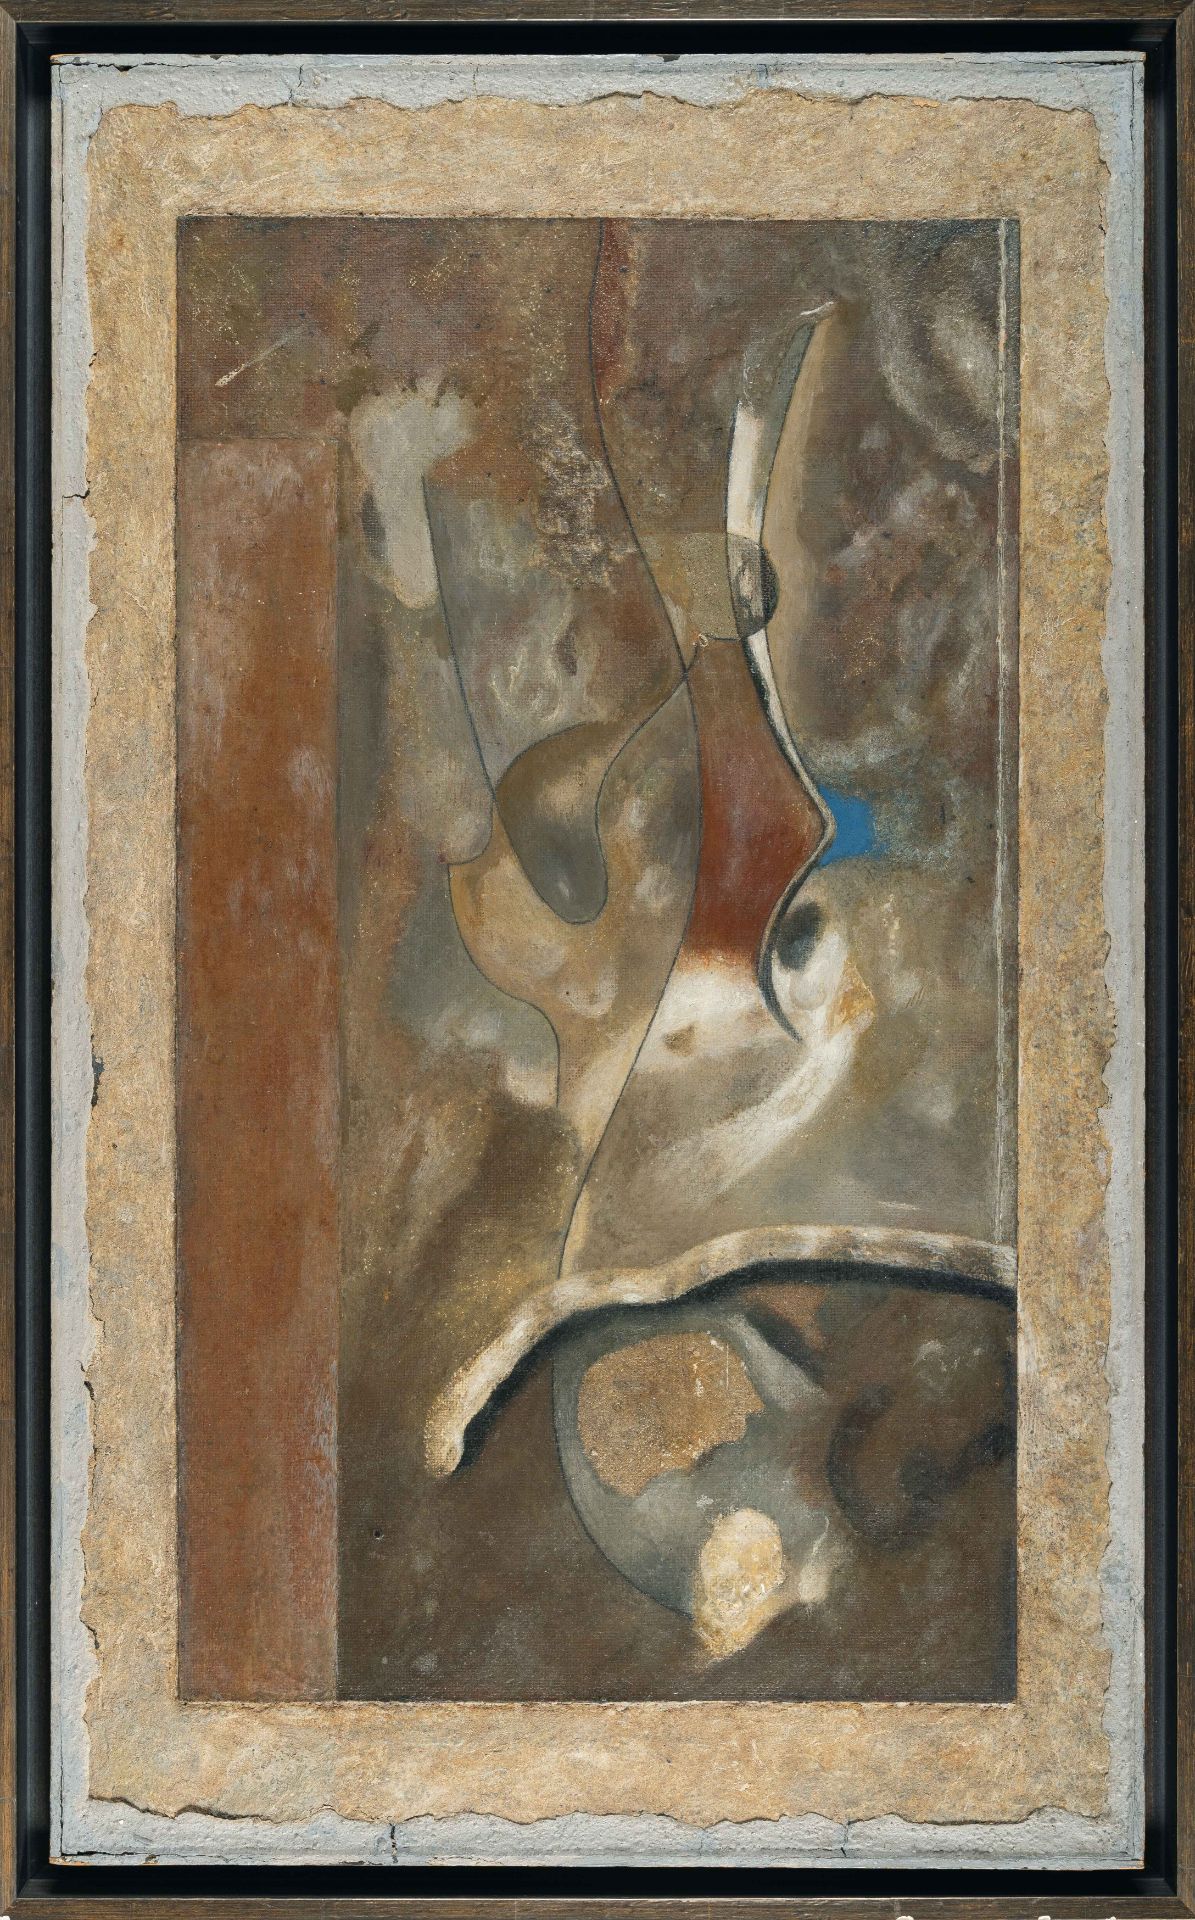 Carl Buchheister (1890 - Hannover - 1964) – “Komposition Ind“ (Composition Ind).Mixed media on - Image 4 of 4